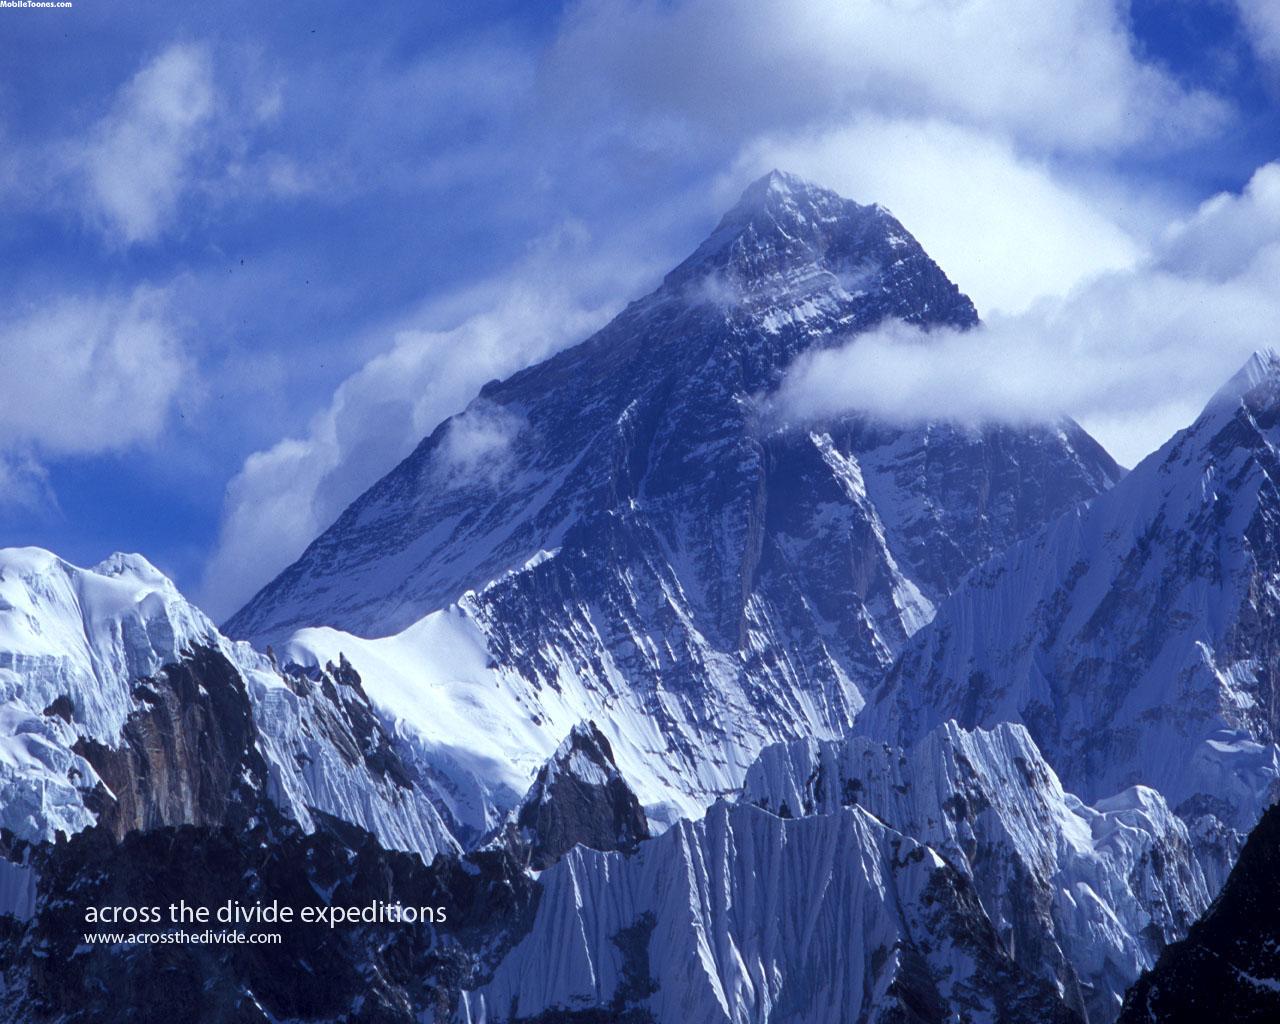 Mount Everest Wallpapers High Quality Wallpapers Photos